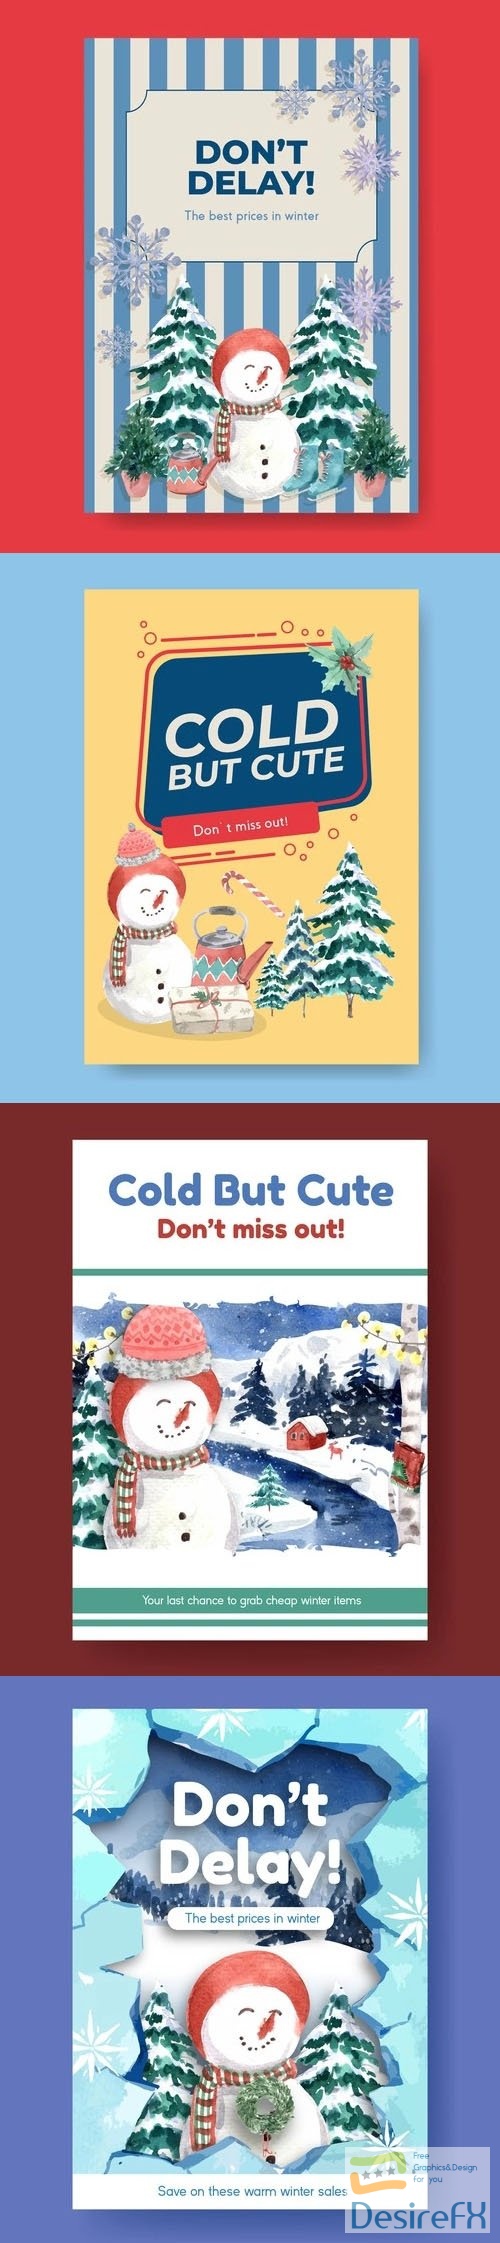 Hand Drawn Winter Sales Posters Collection Vol.2 - 8 Vector Templates